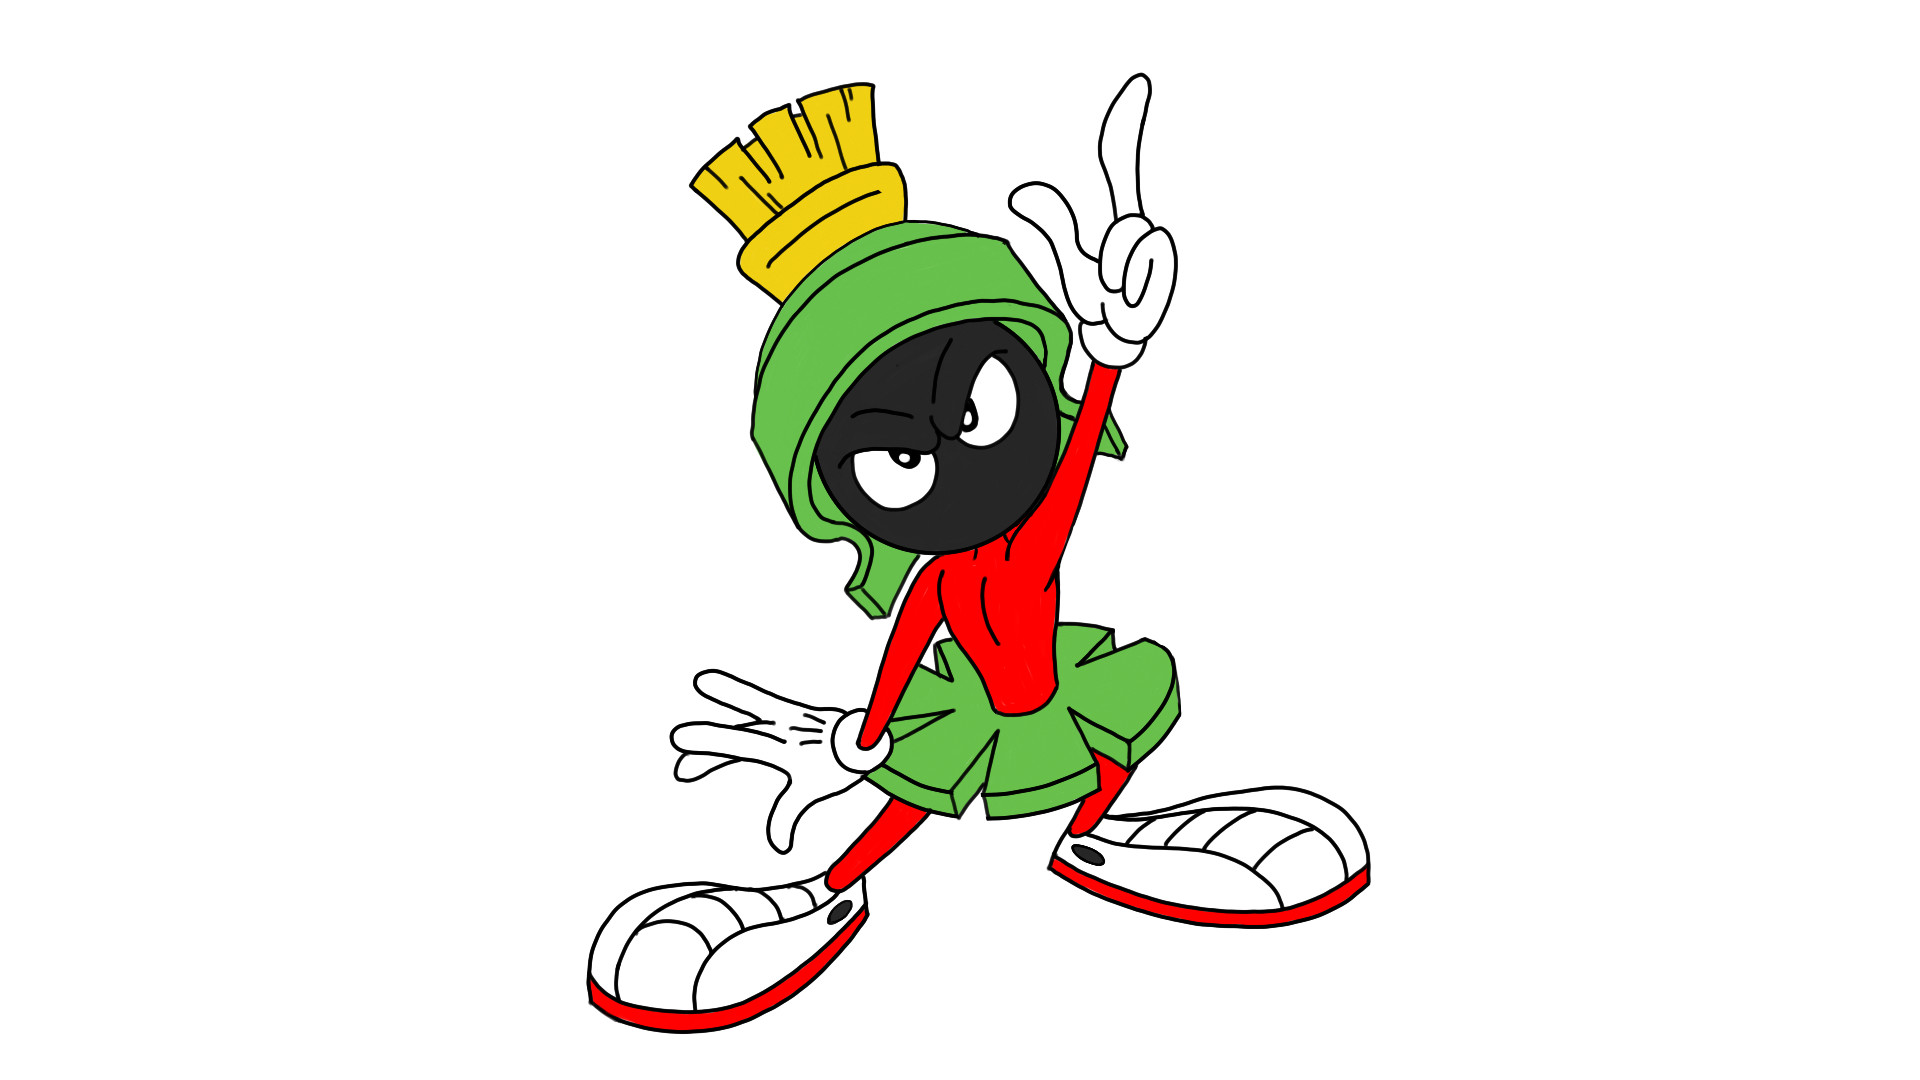 Artstation Drawing Marvin The Martian Daily Cartoon Drawings Check out our marvin the martian selection for the very best in unique or custom, handmade pieces from our face masks & coverings shops. artstation drawing marvin the martian